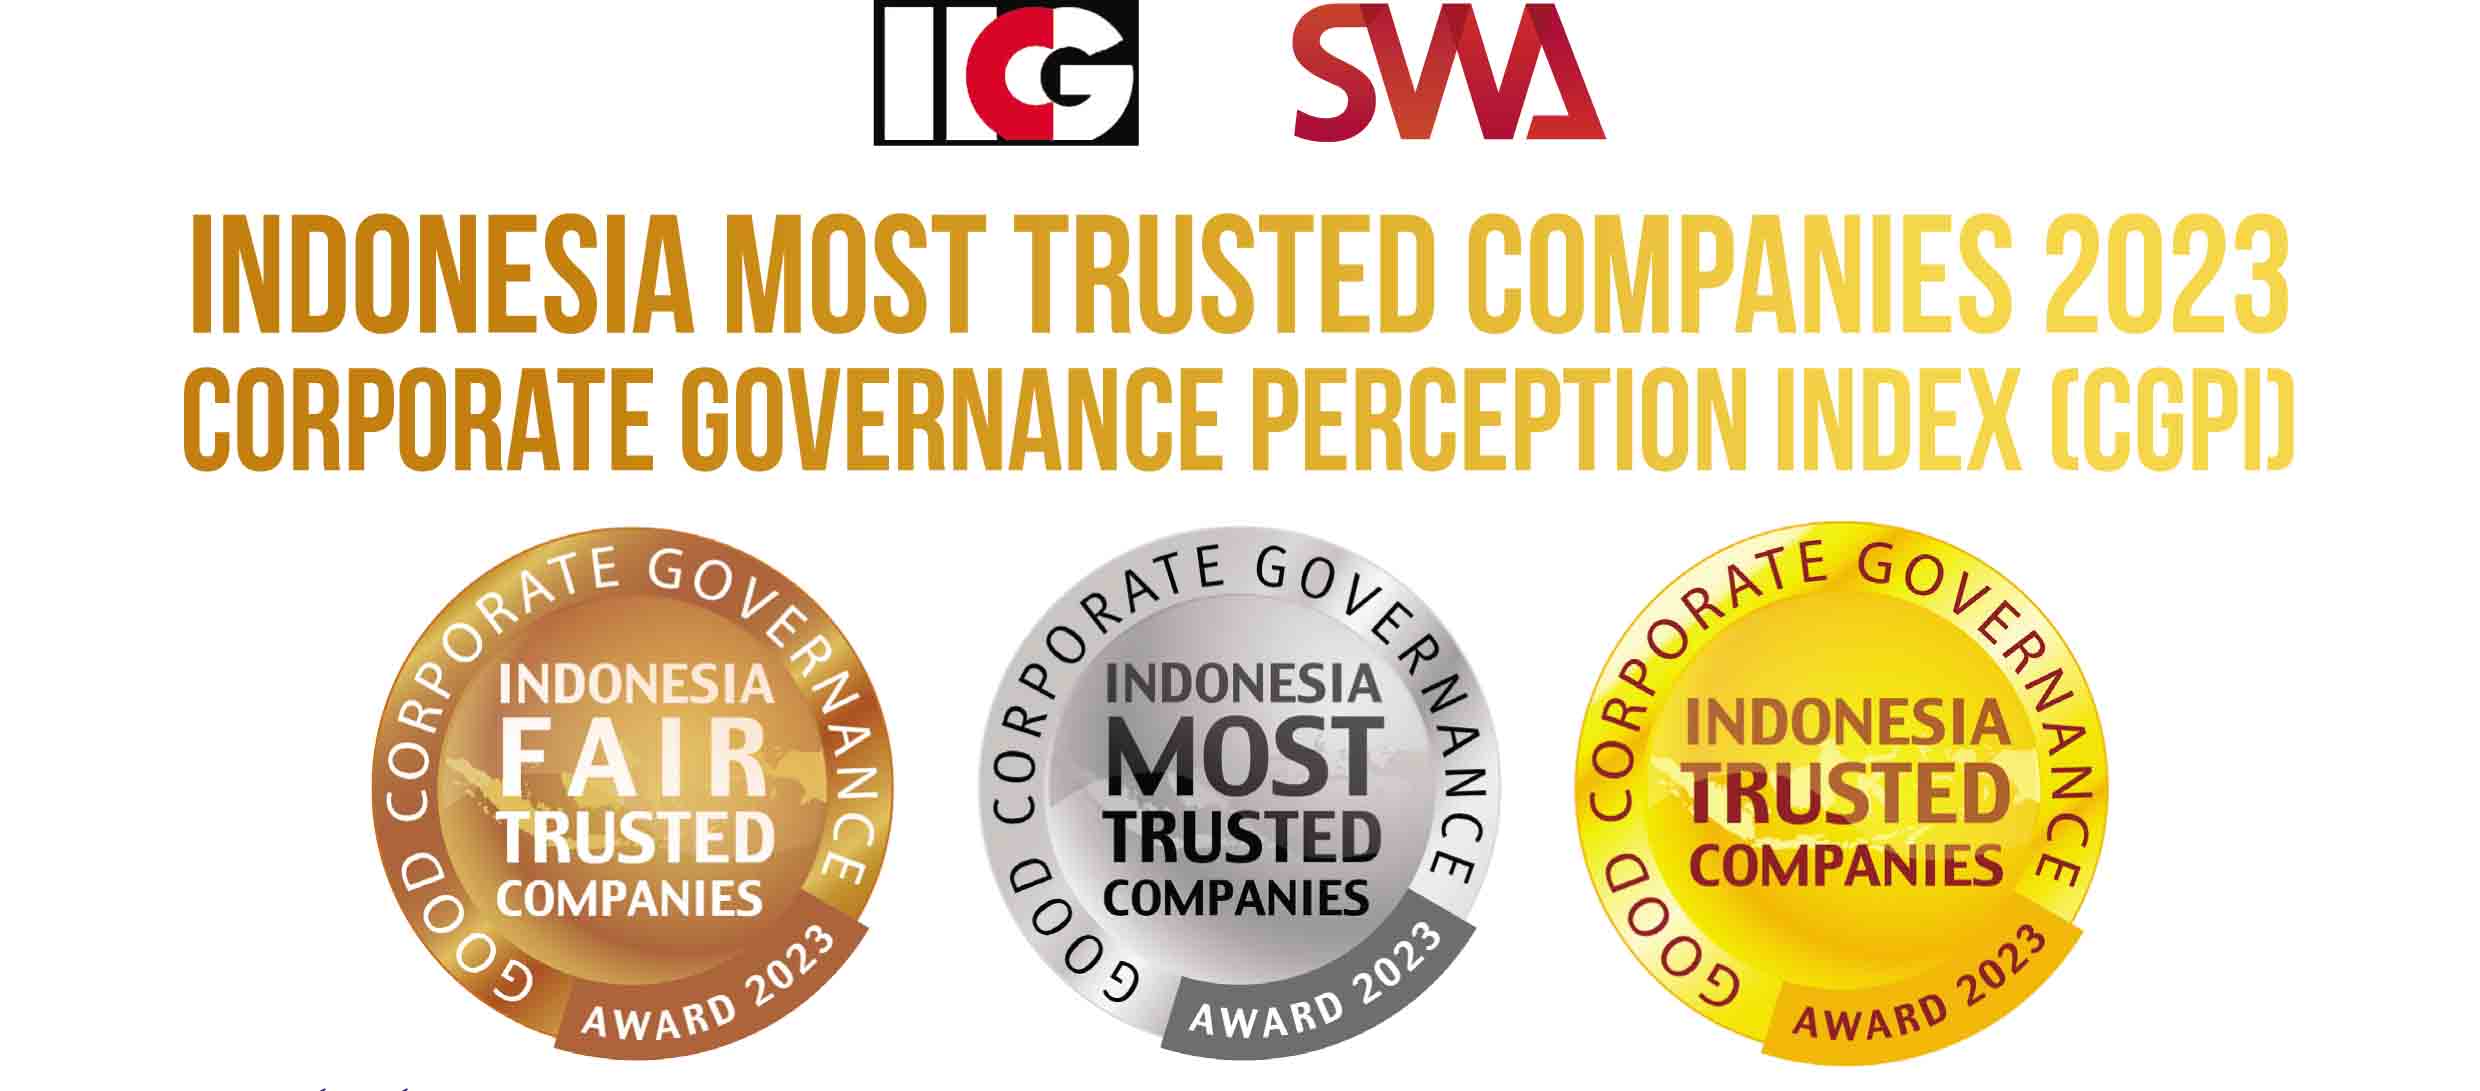 INDONESIA MOST TRUSTED COMPANIES 2023 CORPORATE GOVERNANCE PERCEPTION INDEX (CGPI)